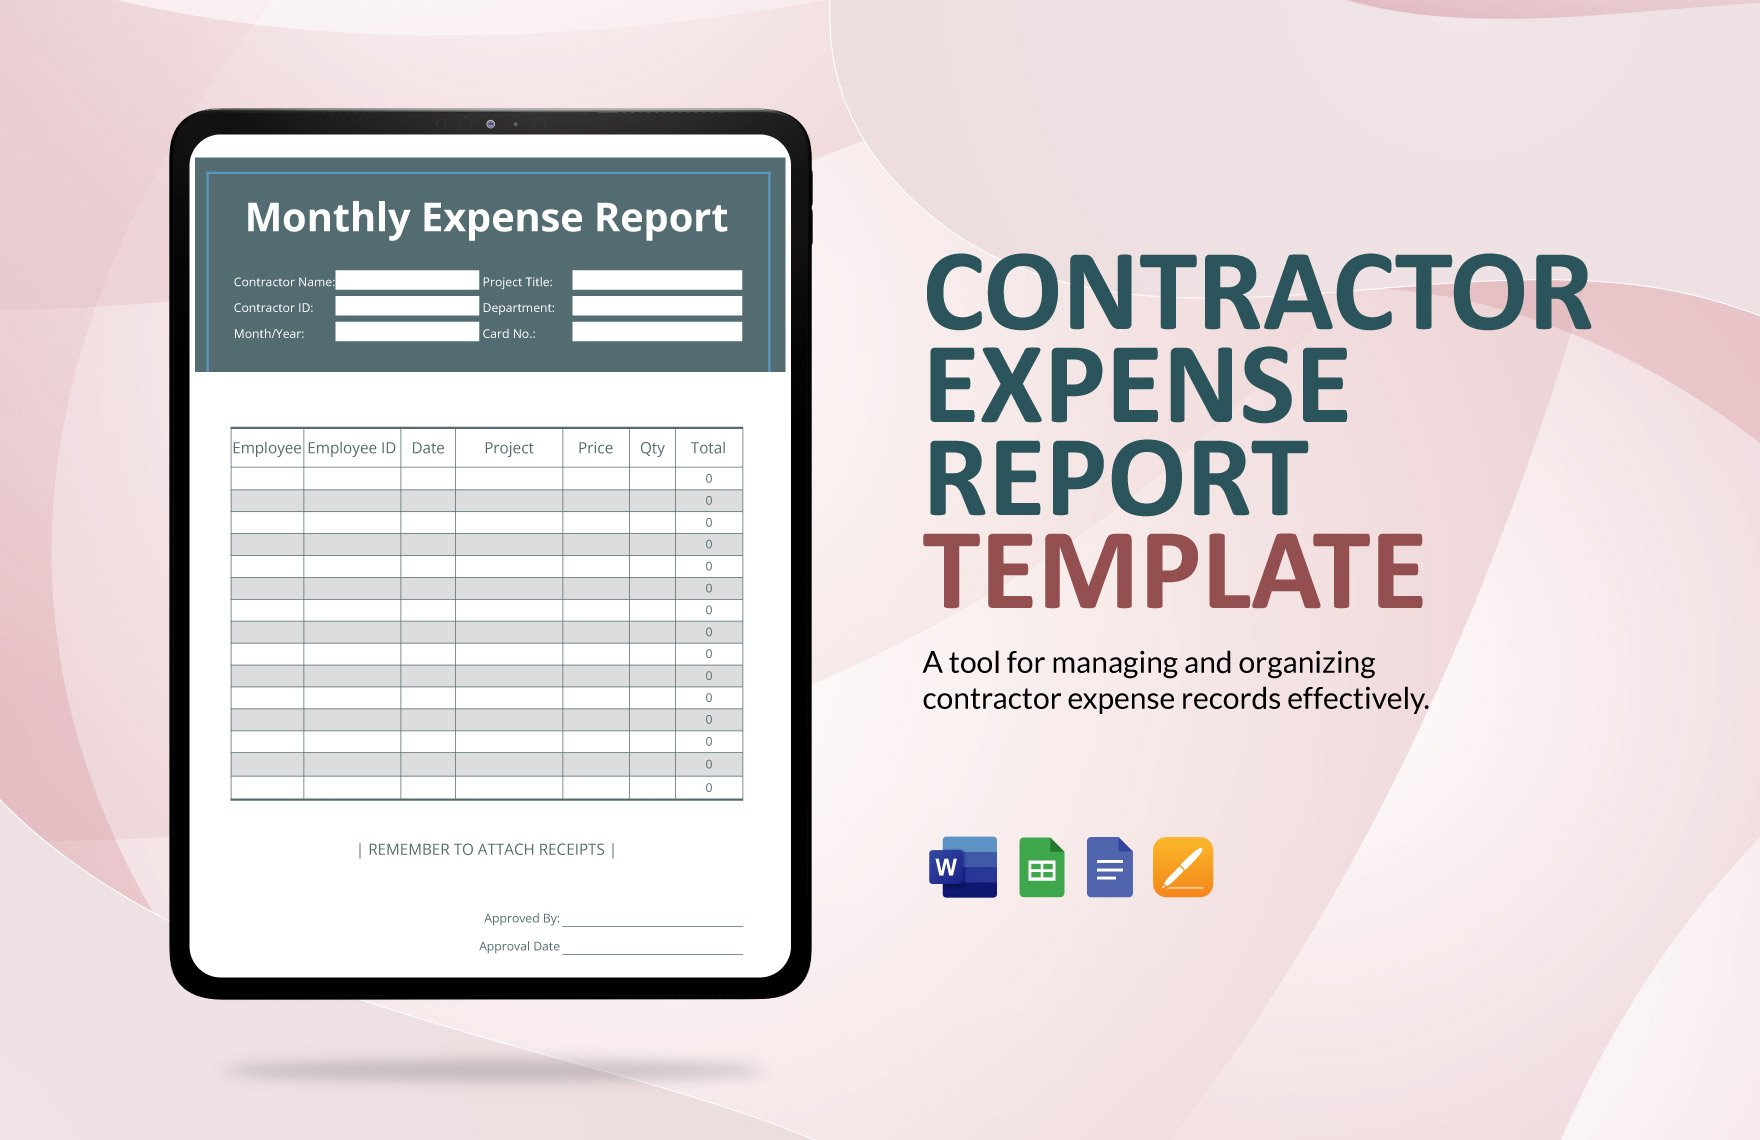 Contractor Expense Report Template in Word, Google Docs, Google Sheets, Apple Pages